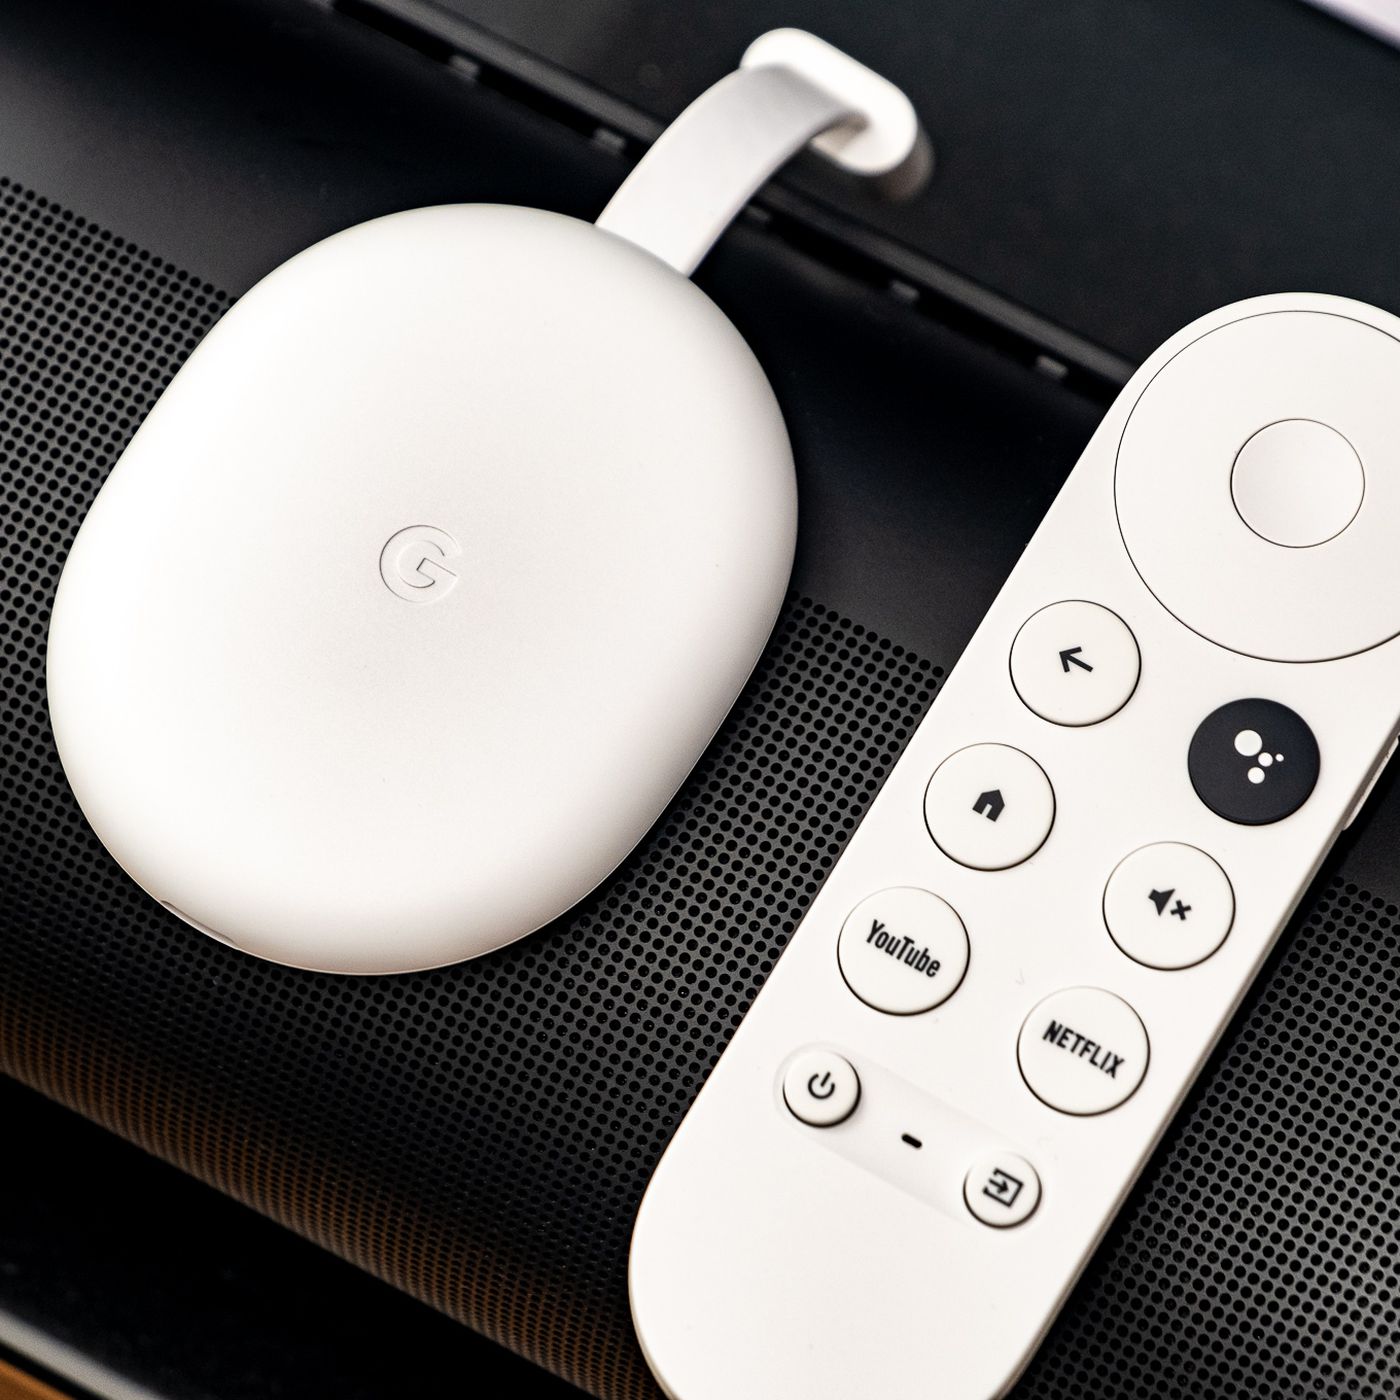 Cuatro Resolver hígado Looks like Google's cheaper Chromecast is becoming a reality - The Verge